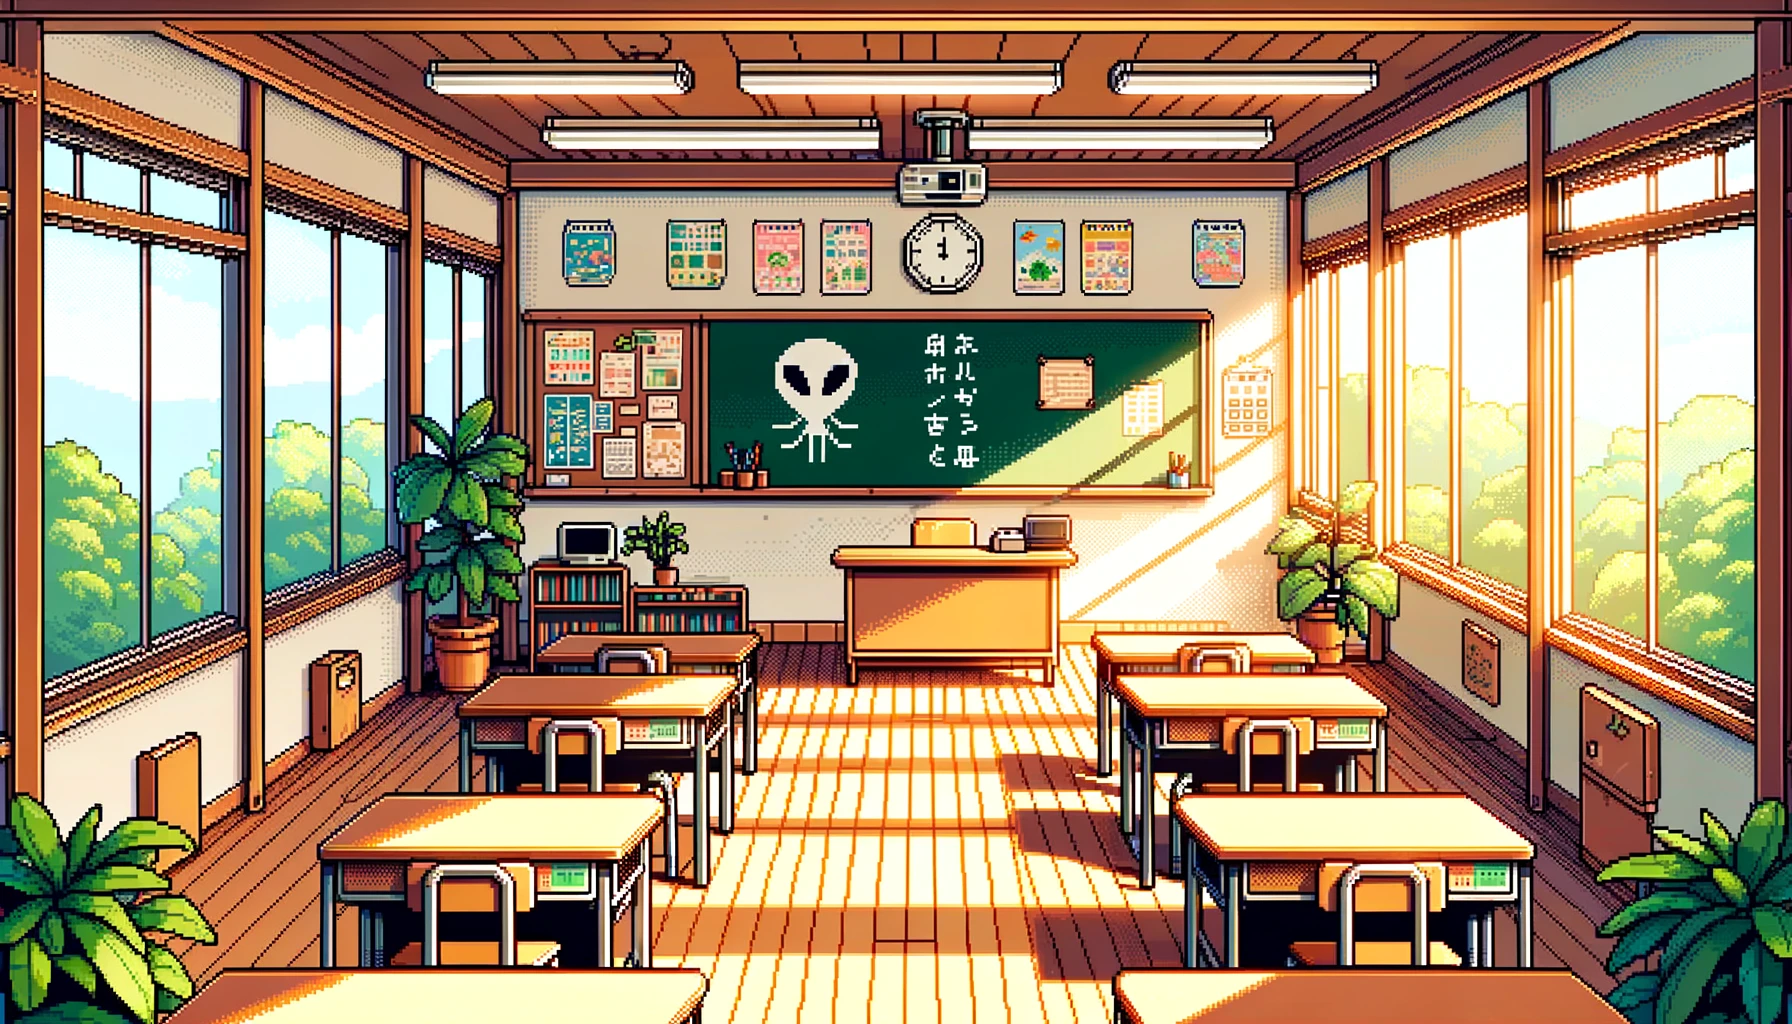 A japanese classroom with an alien drawn on the blackboard